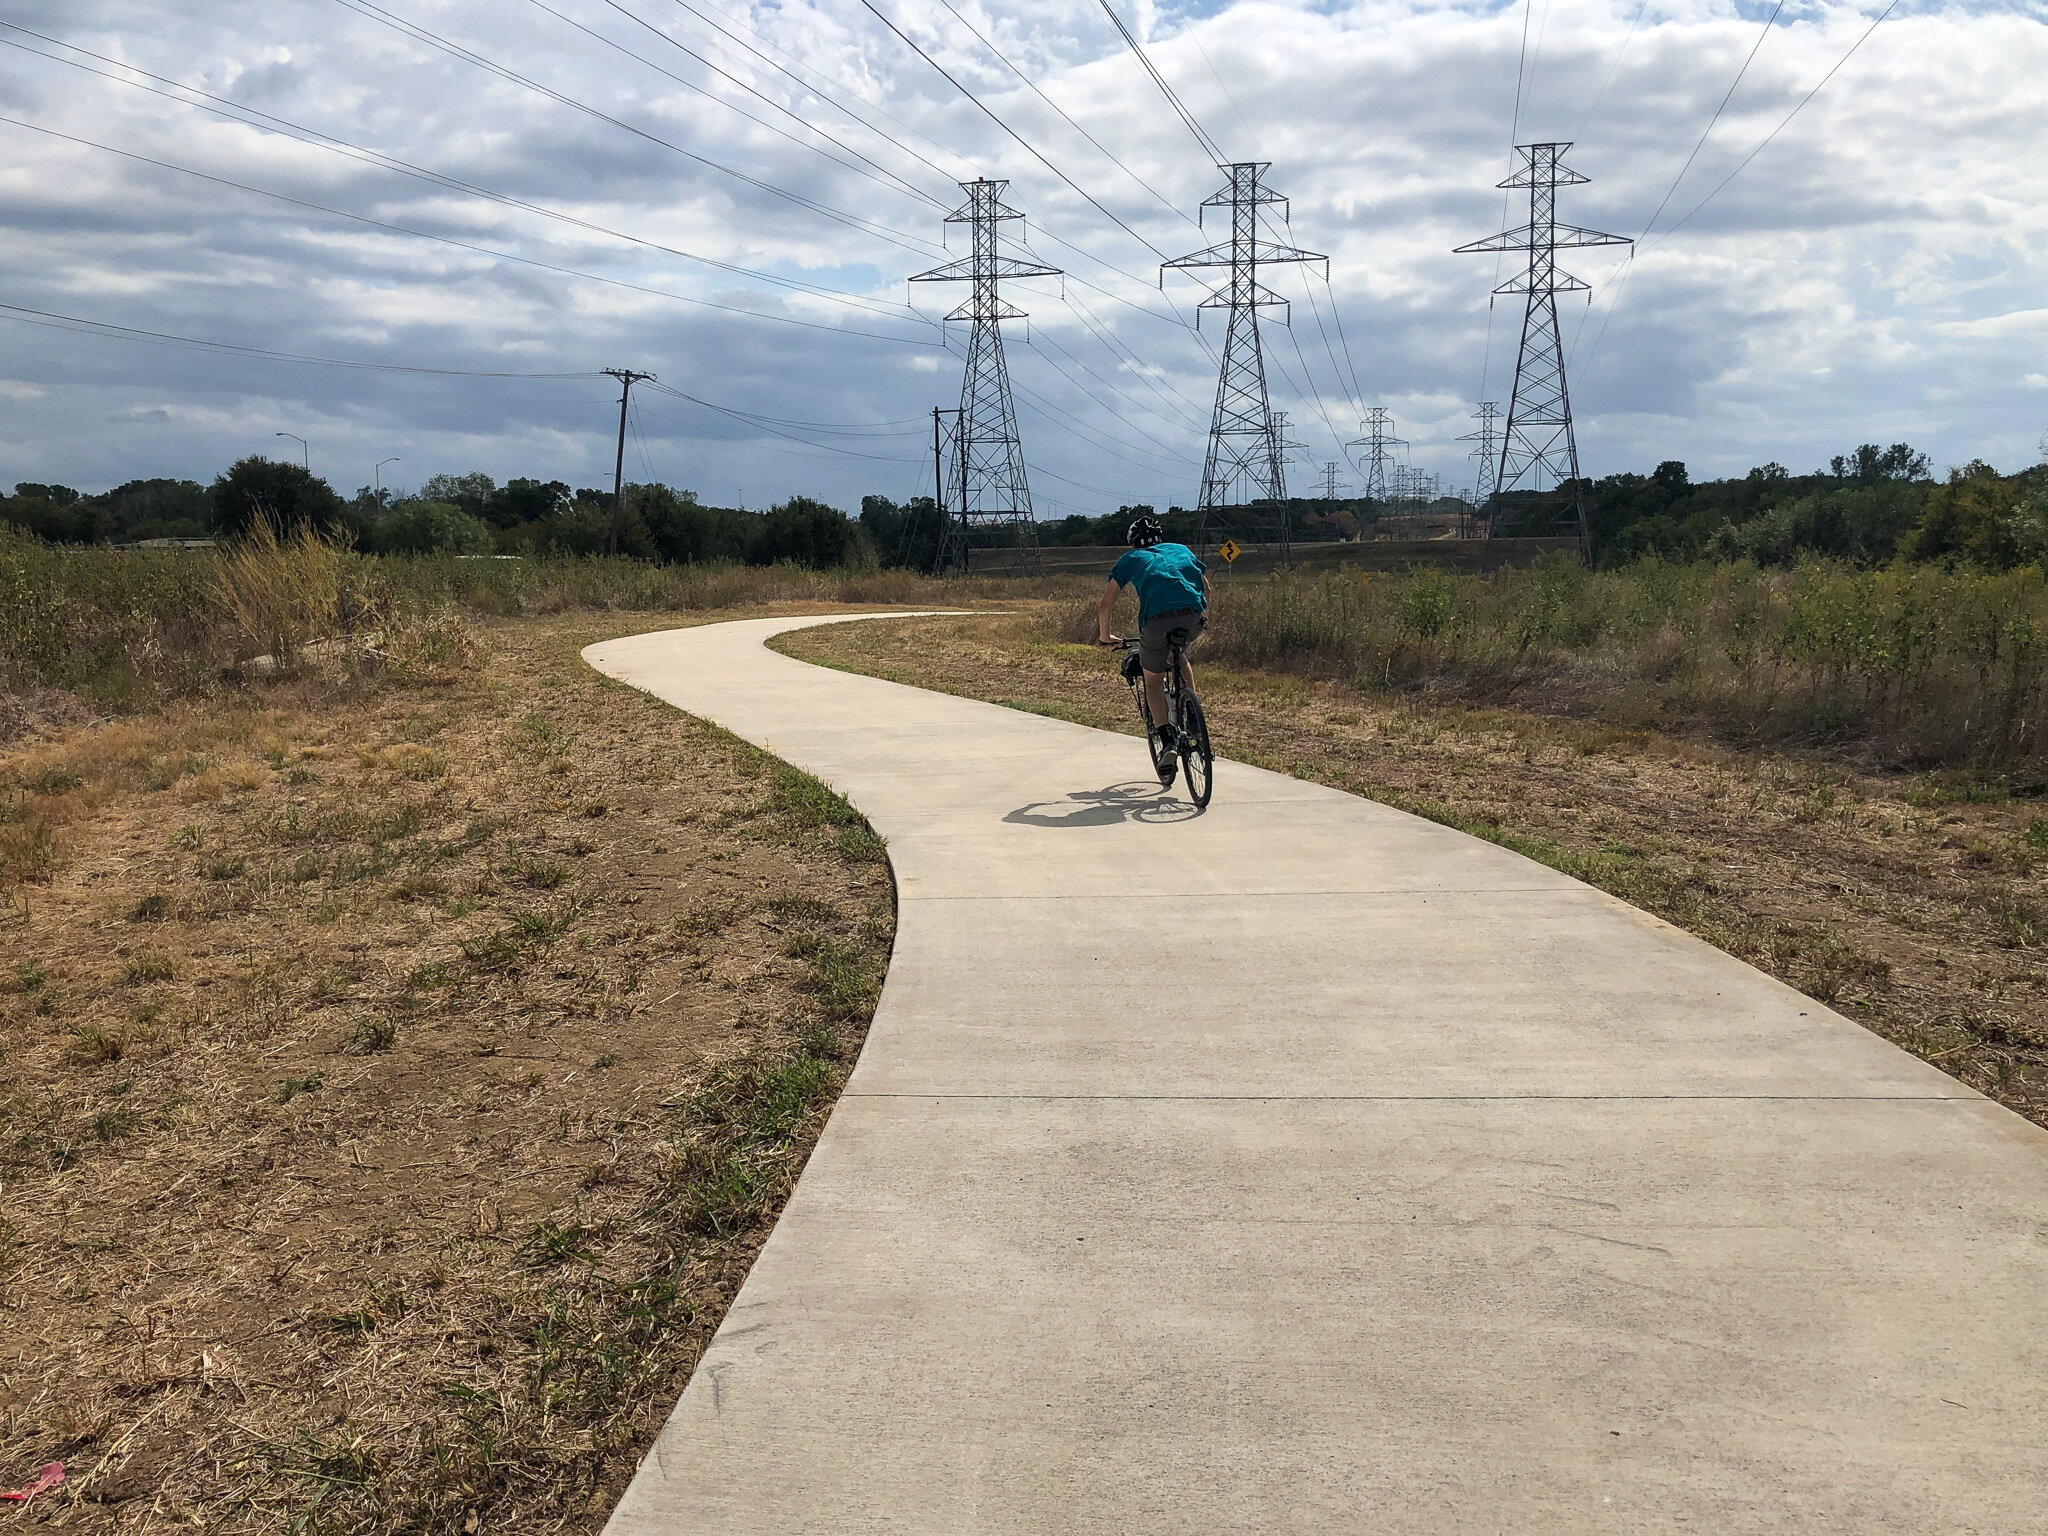  Approaching Fort Worth Branch of Trinity Trails System.  